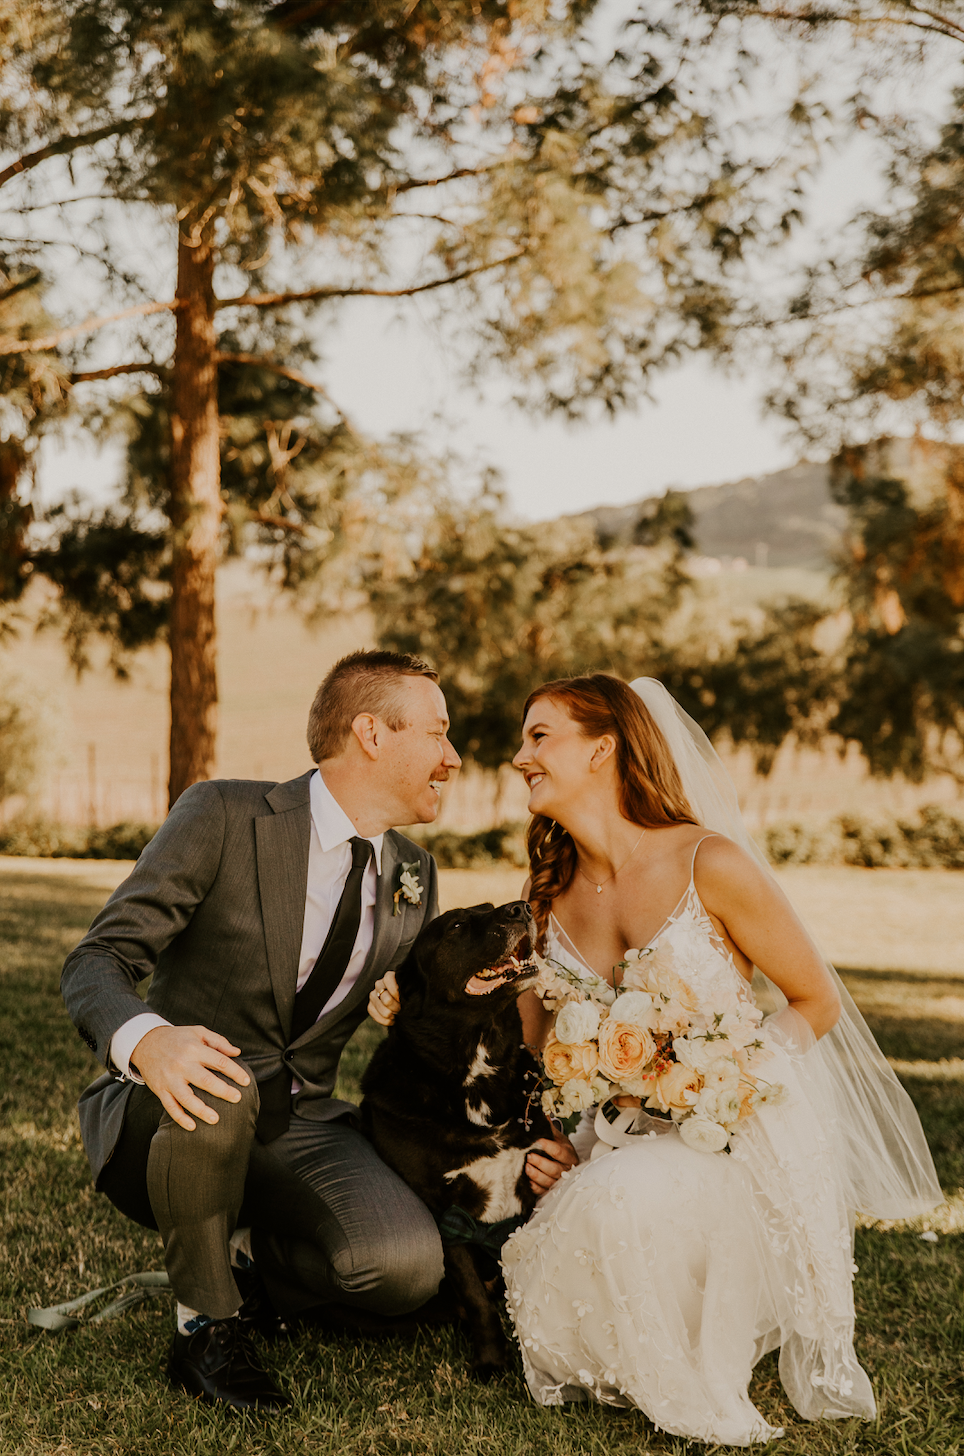 www.santabarbarawedding.com | Allison Slater Photography | Greengate Ranch | Alicia Falango | Anna Le Pley Taylor | The Queen’s Bees | Couple Posing with Their Dog